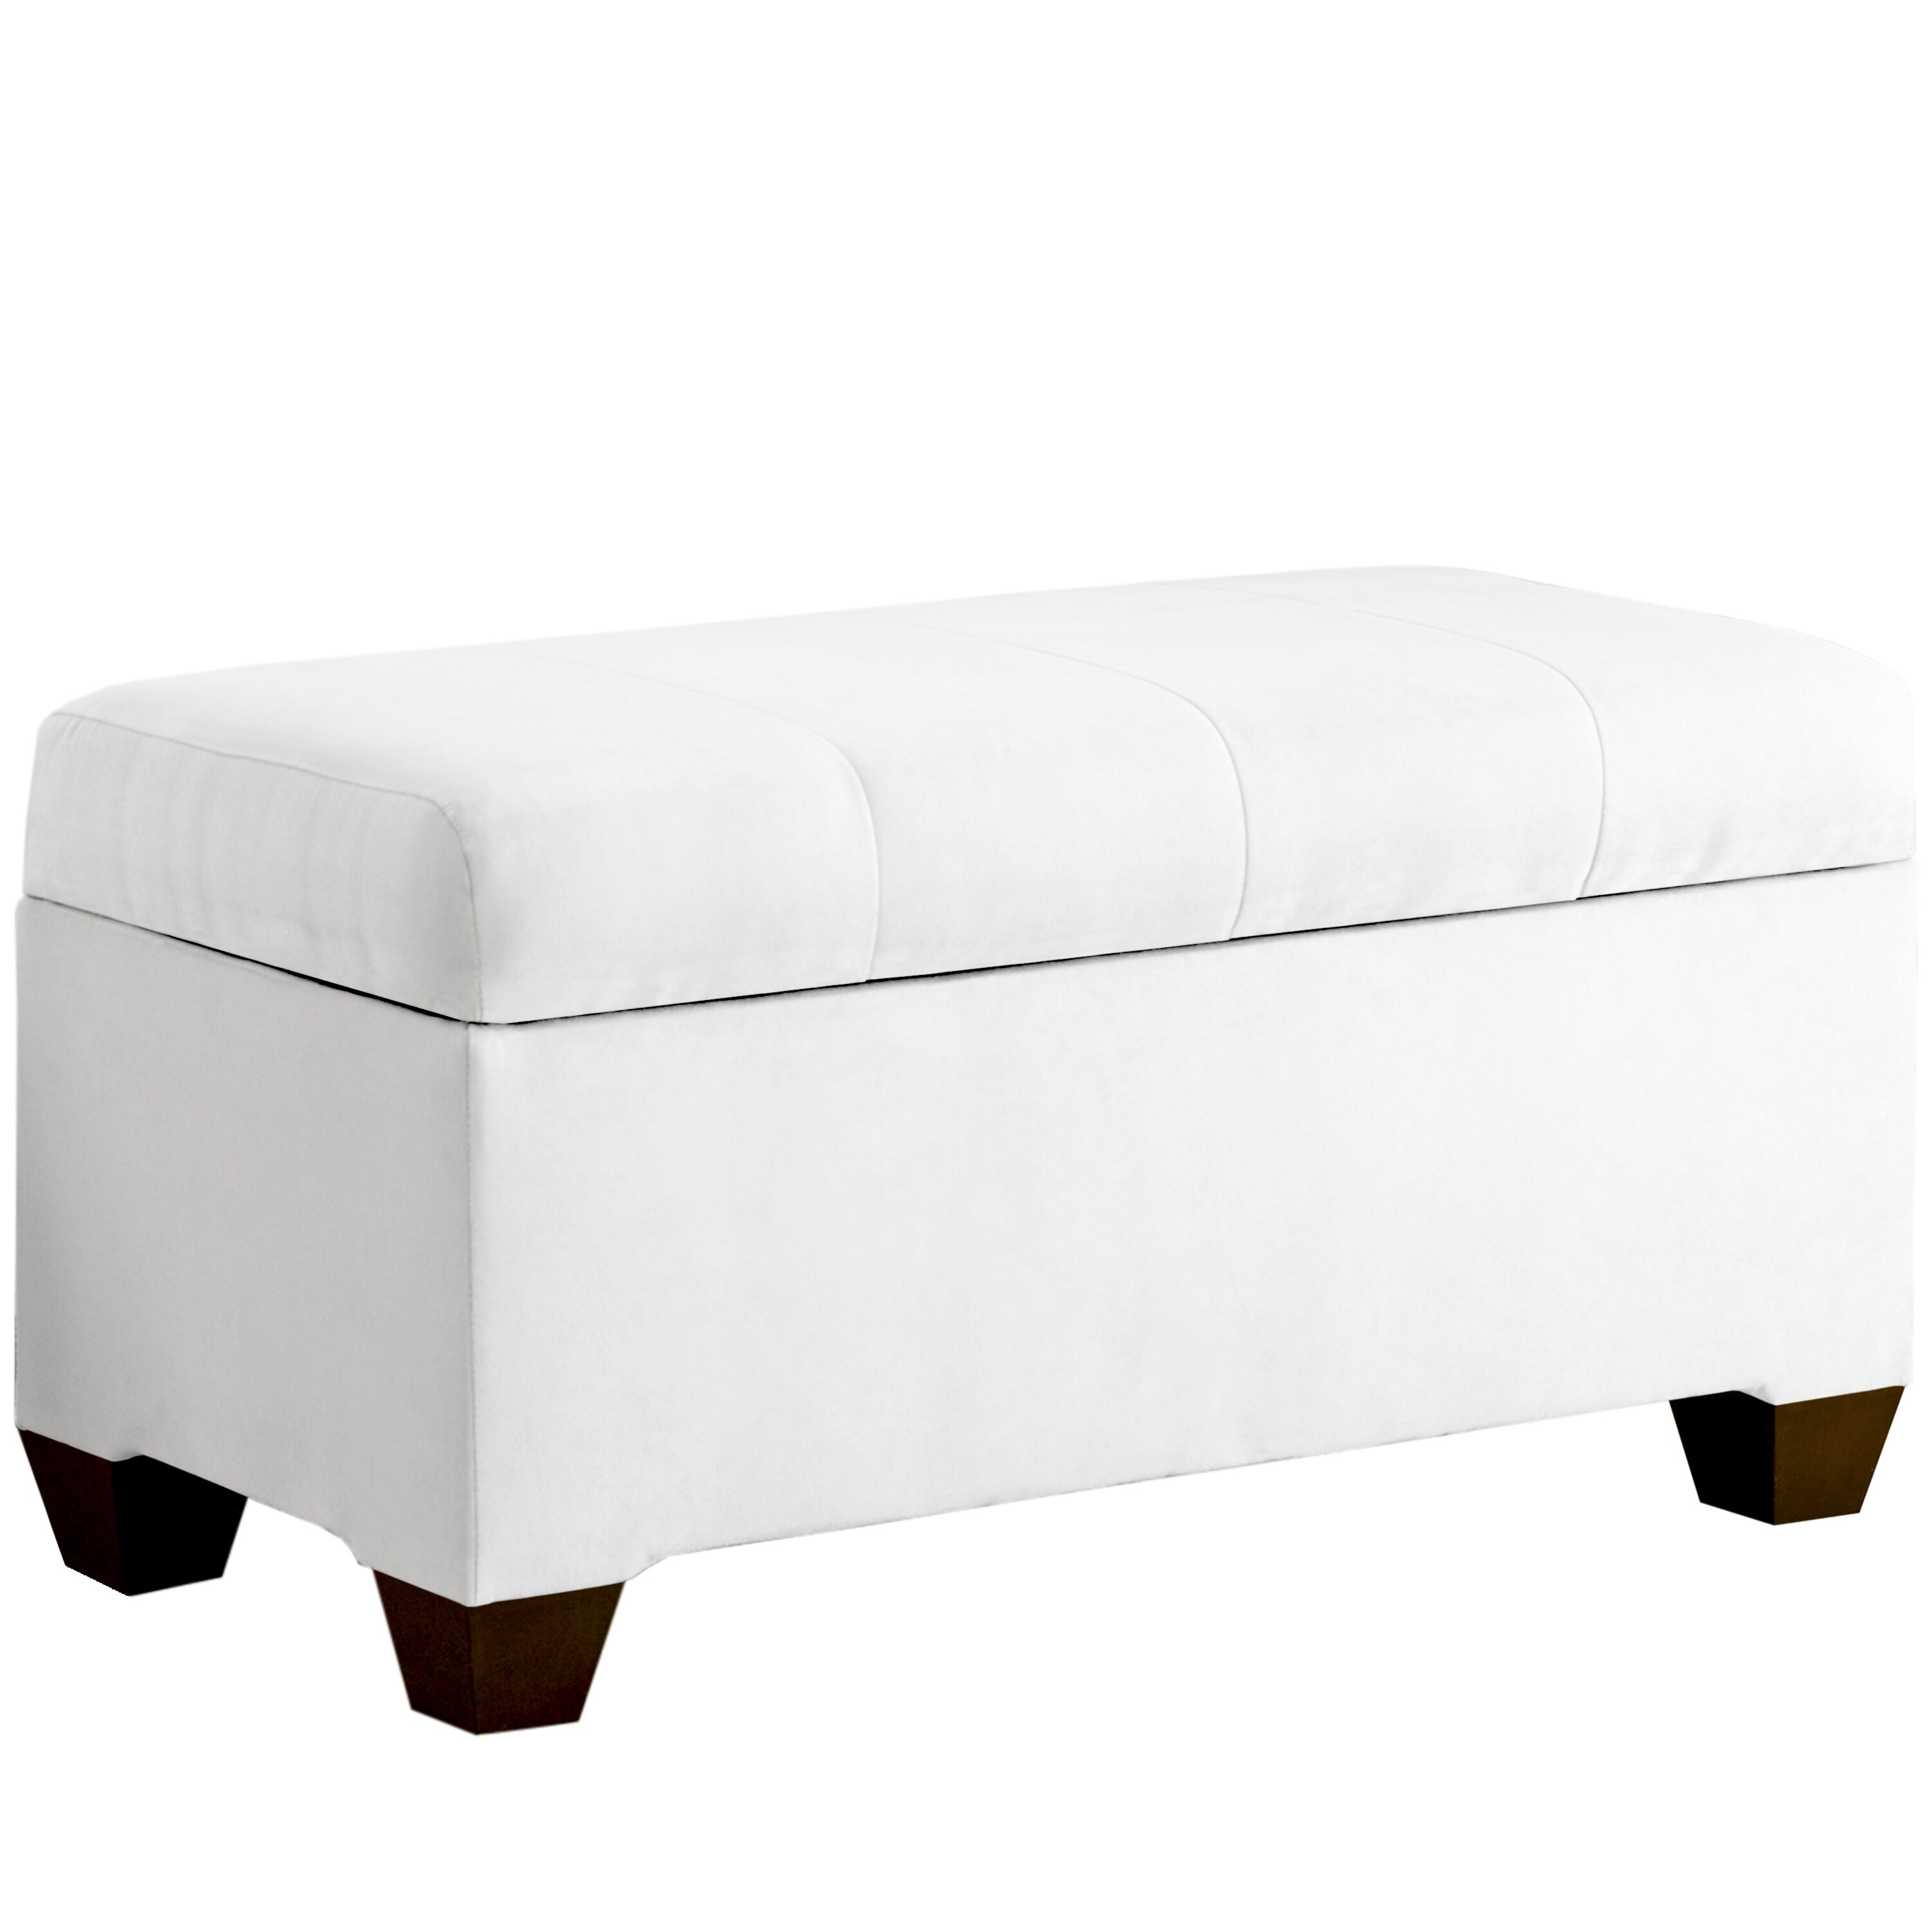 White Storage Bench With Seamed Top